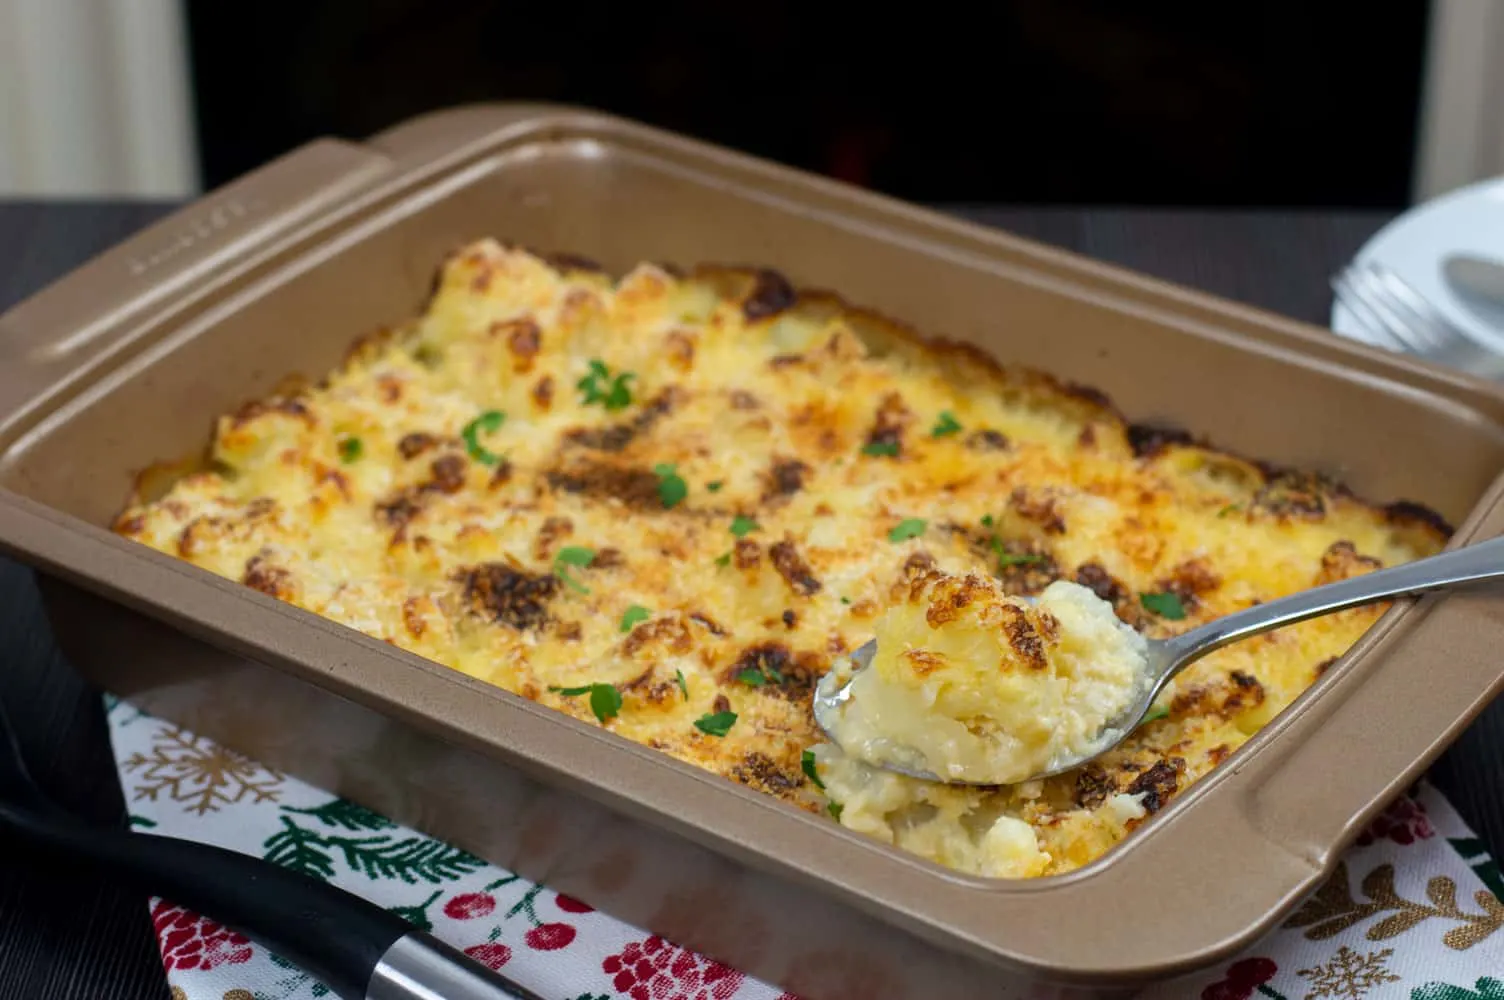 A baking tray with freshly baked cauliflower cheese with a crunchy topping. A spoon taking out a piece of cauliflower from the baking tray.